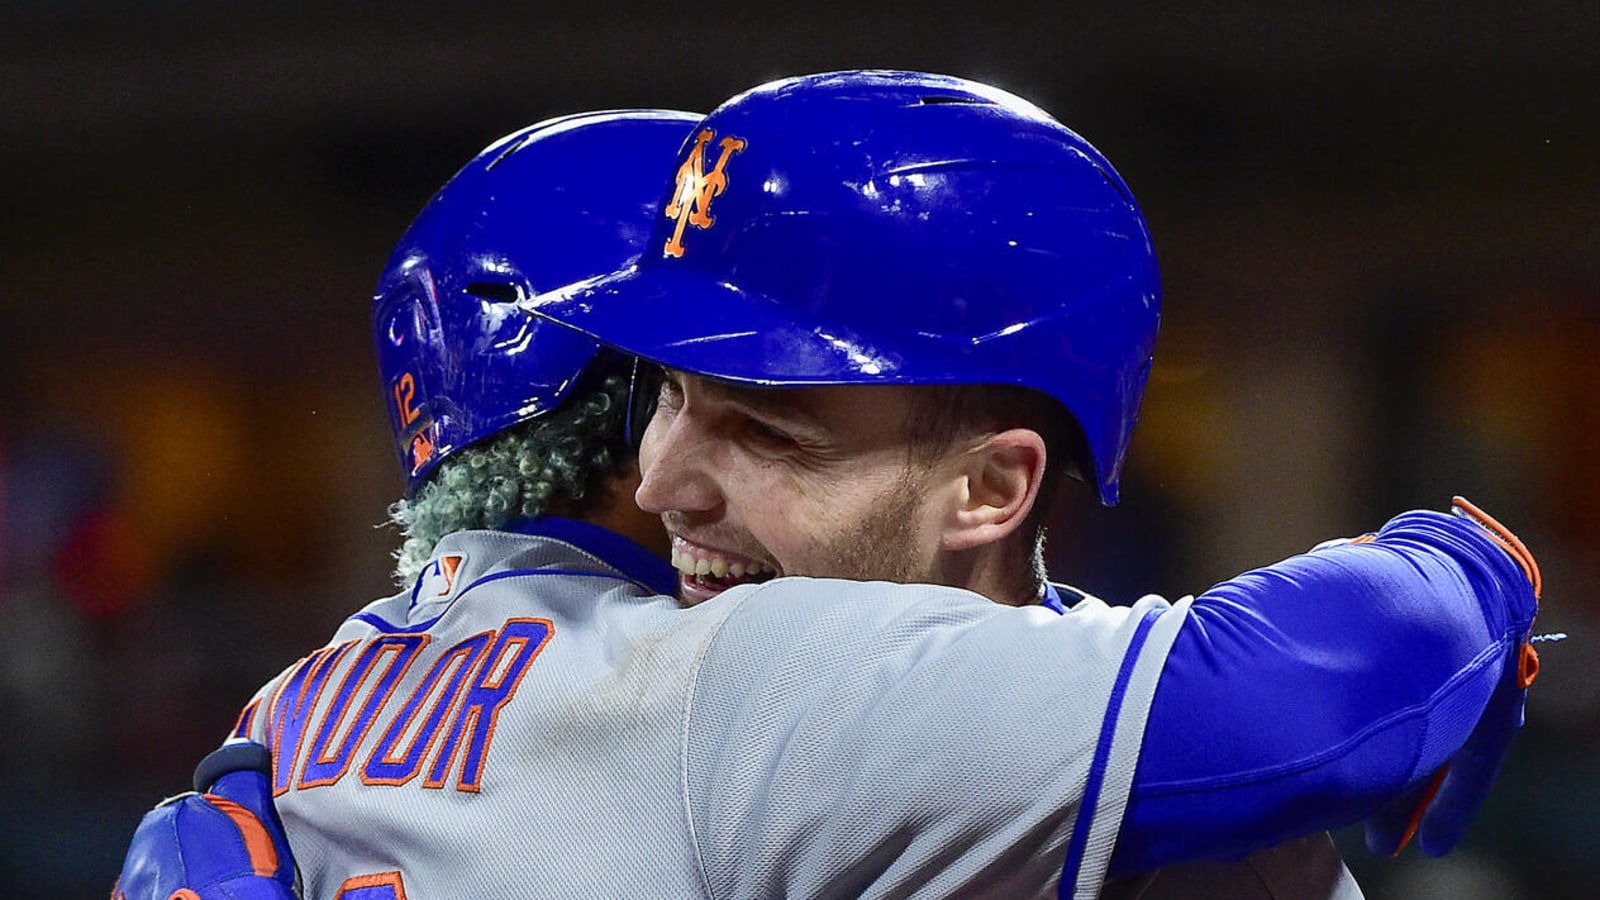 Mets score five runs in dramatic ninth inning to beat Cardinals